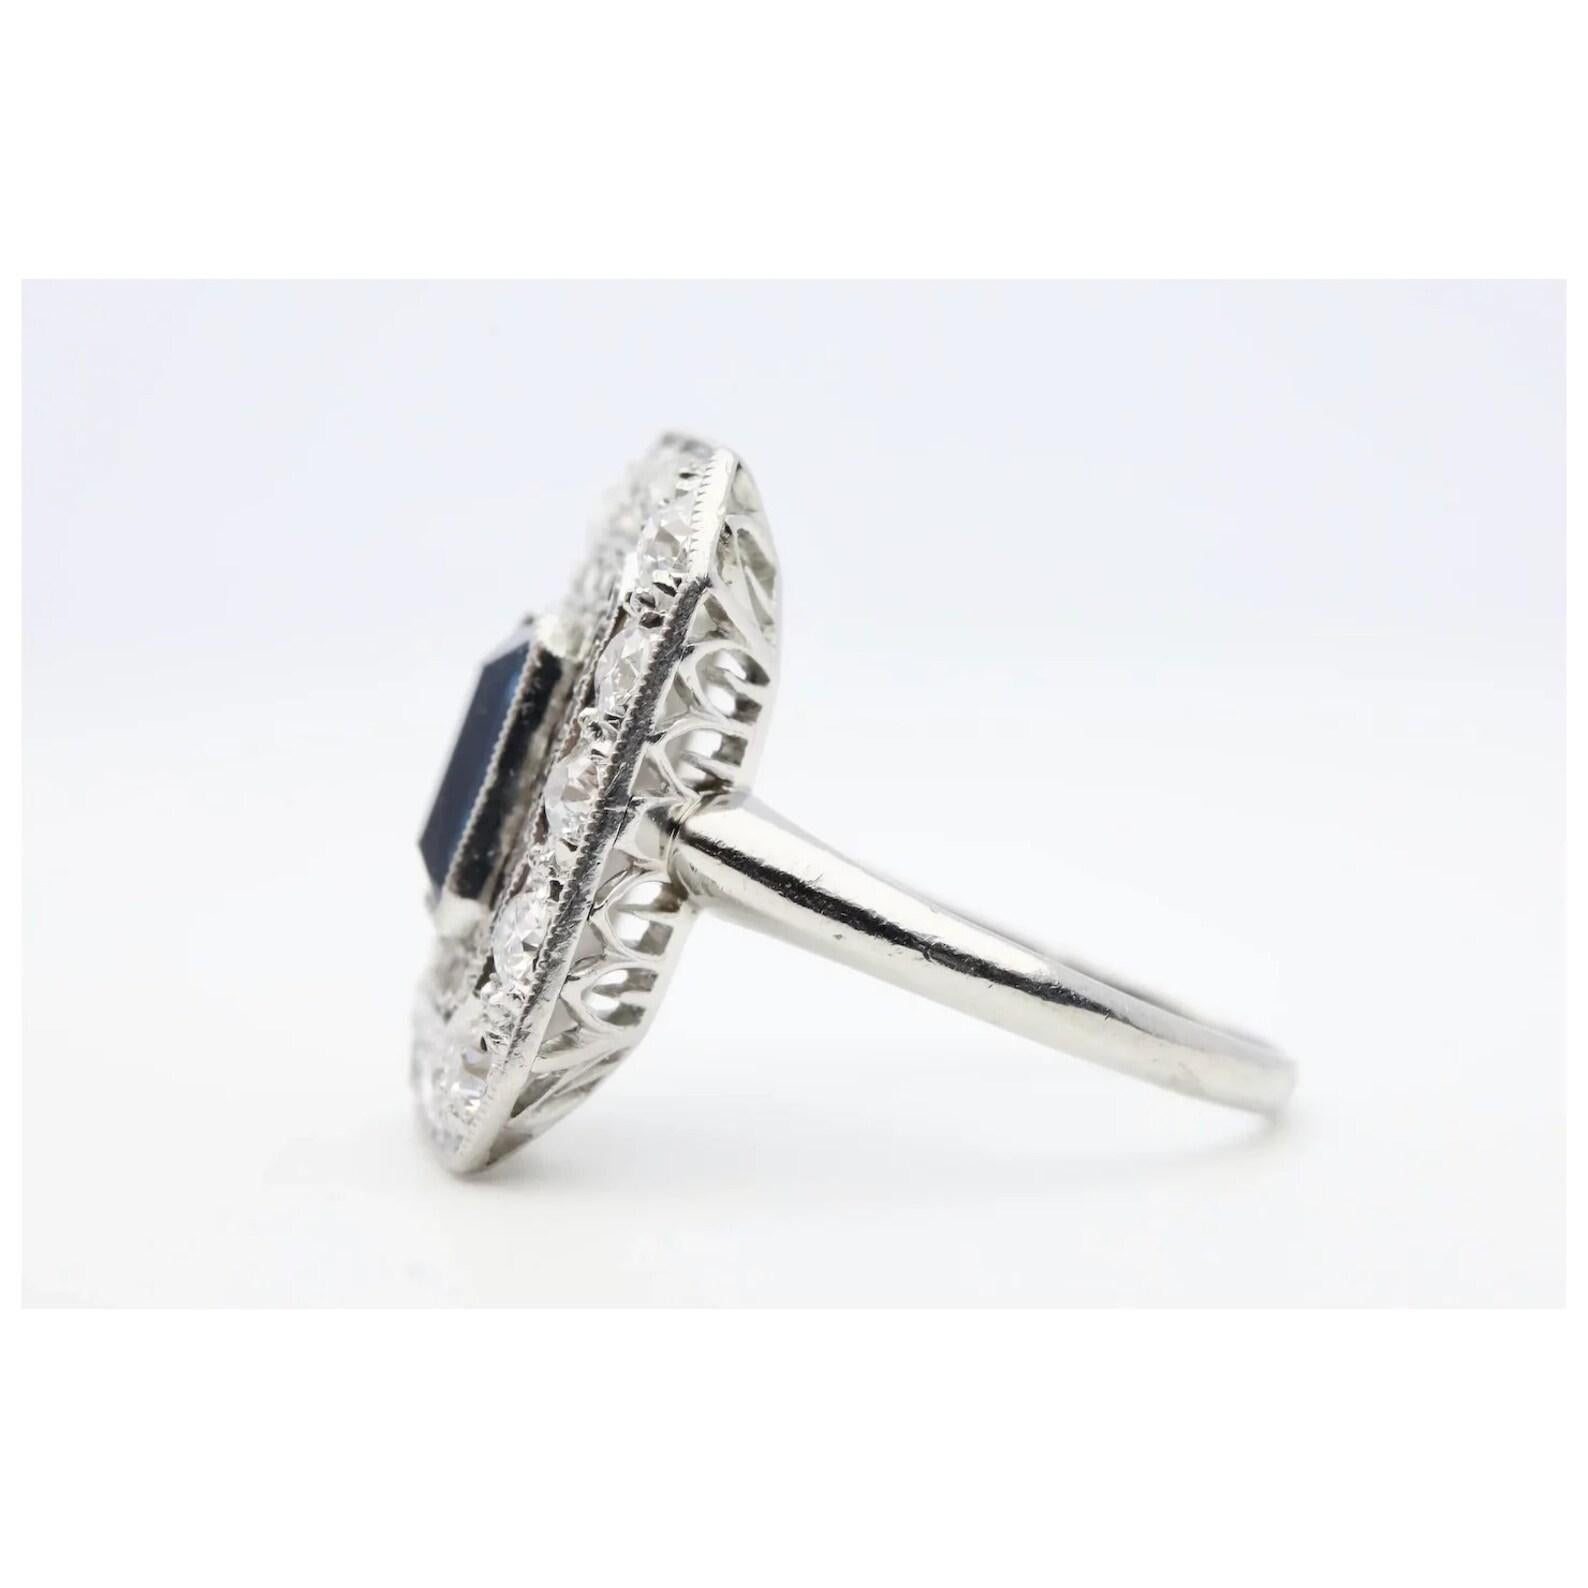 A beautiful handmade Edwardian period sapphire, and diamond filigree ring in platinum. Centered by a 1.25 carat natural No Heat rectangular sapphire of beautiful rich velvety blue color in a miligrained platinum bezel setting. Framing the sapphire